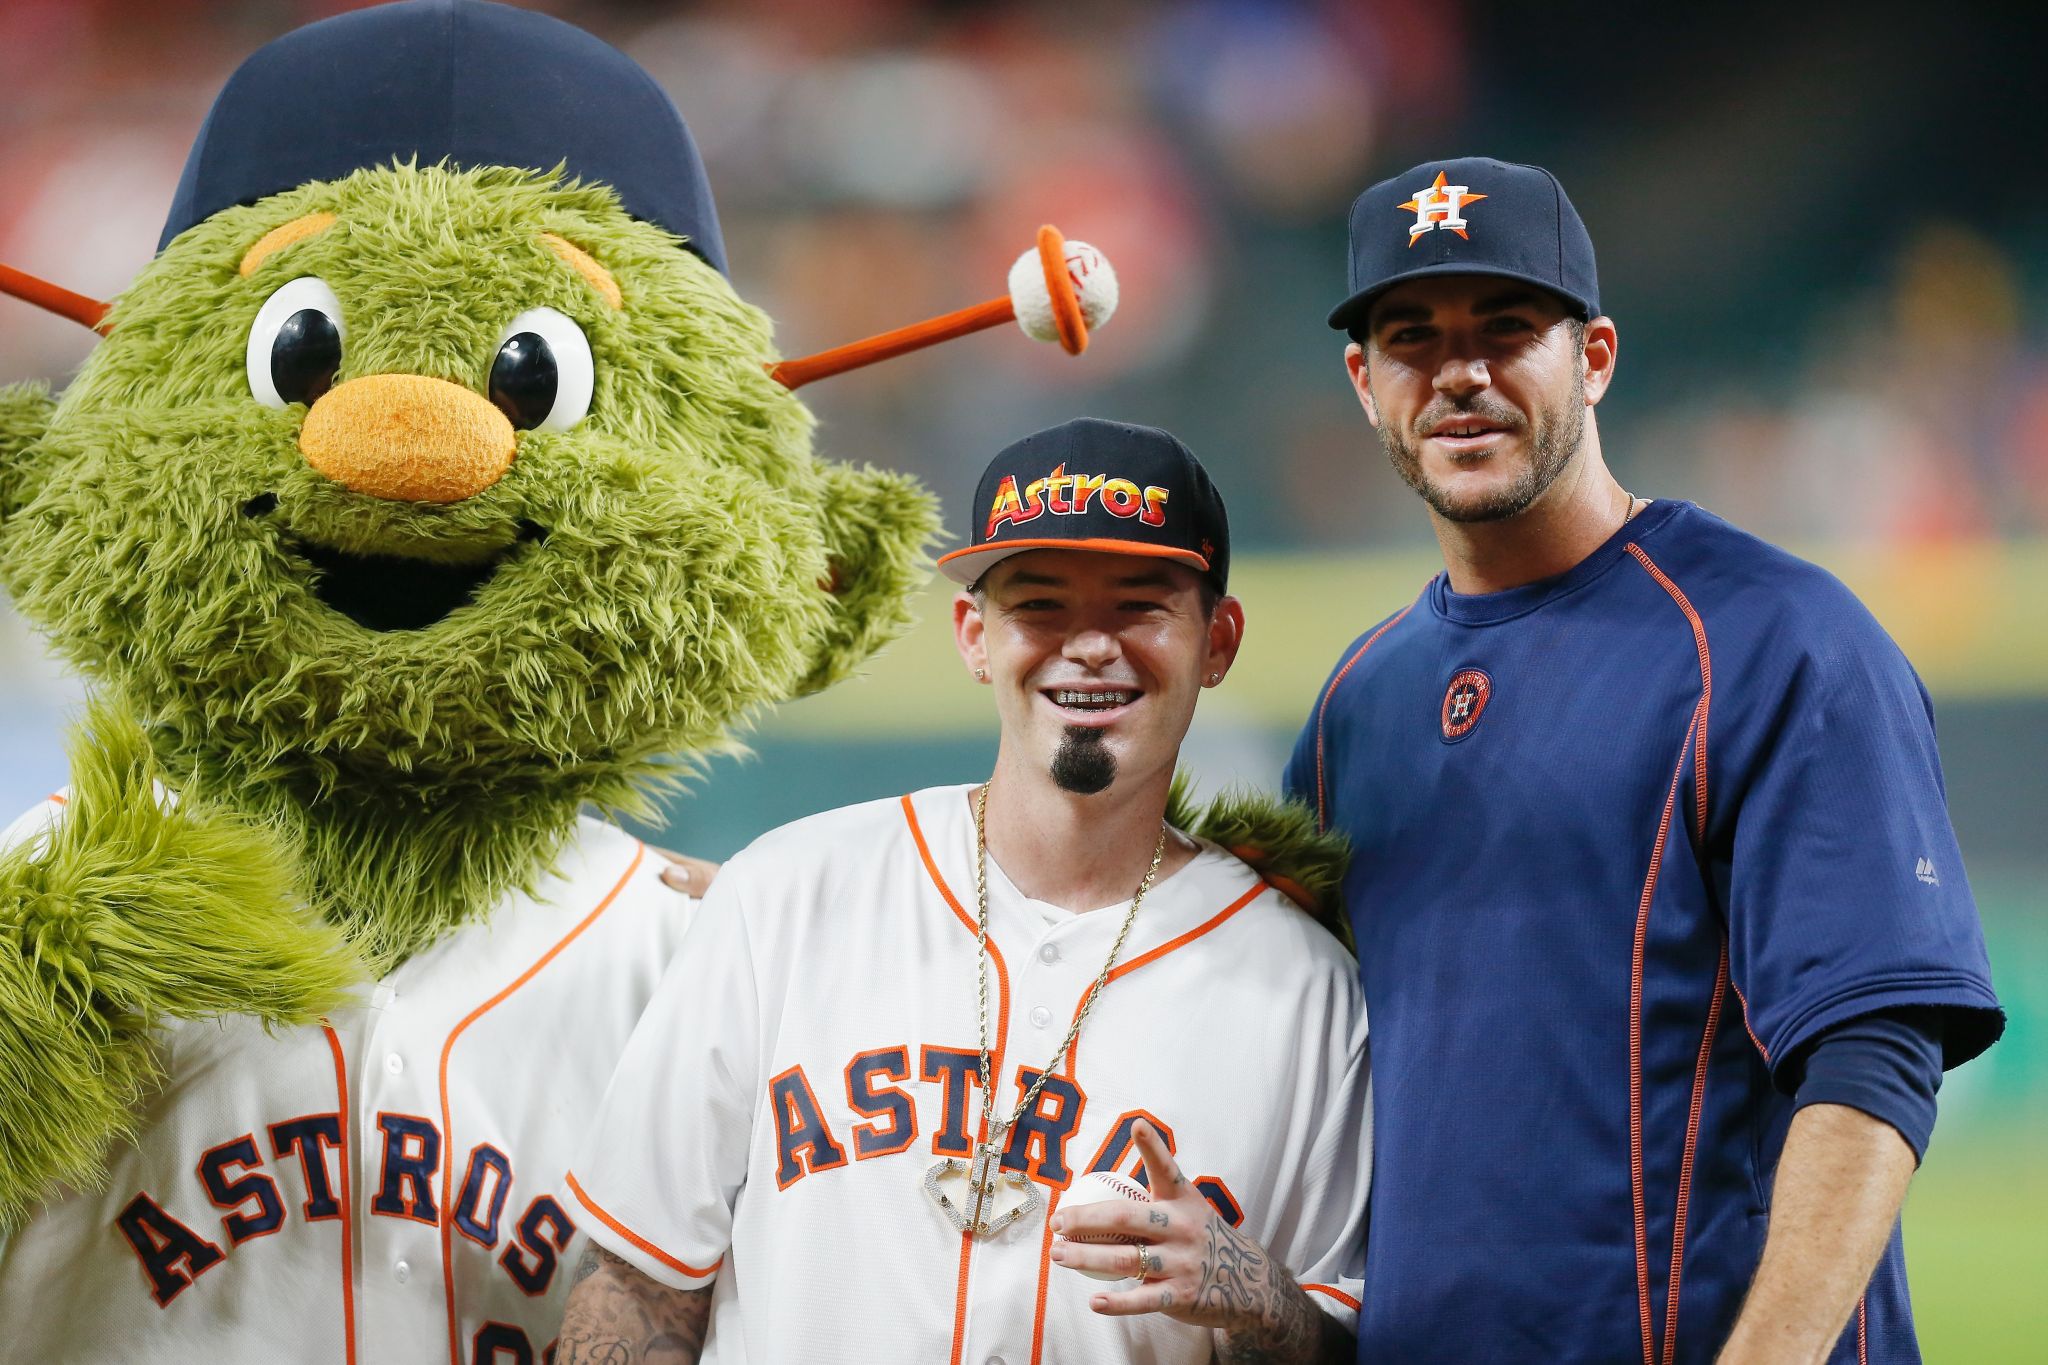 Houston Astros invite young fan shamed for cheering to 1st playoff game -  Good Morning America